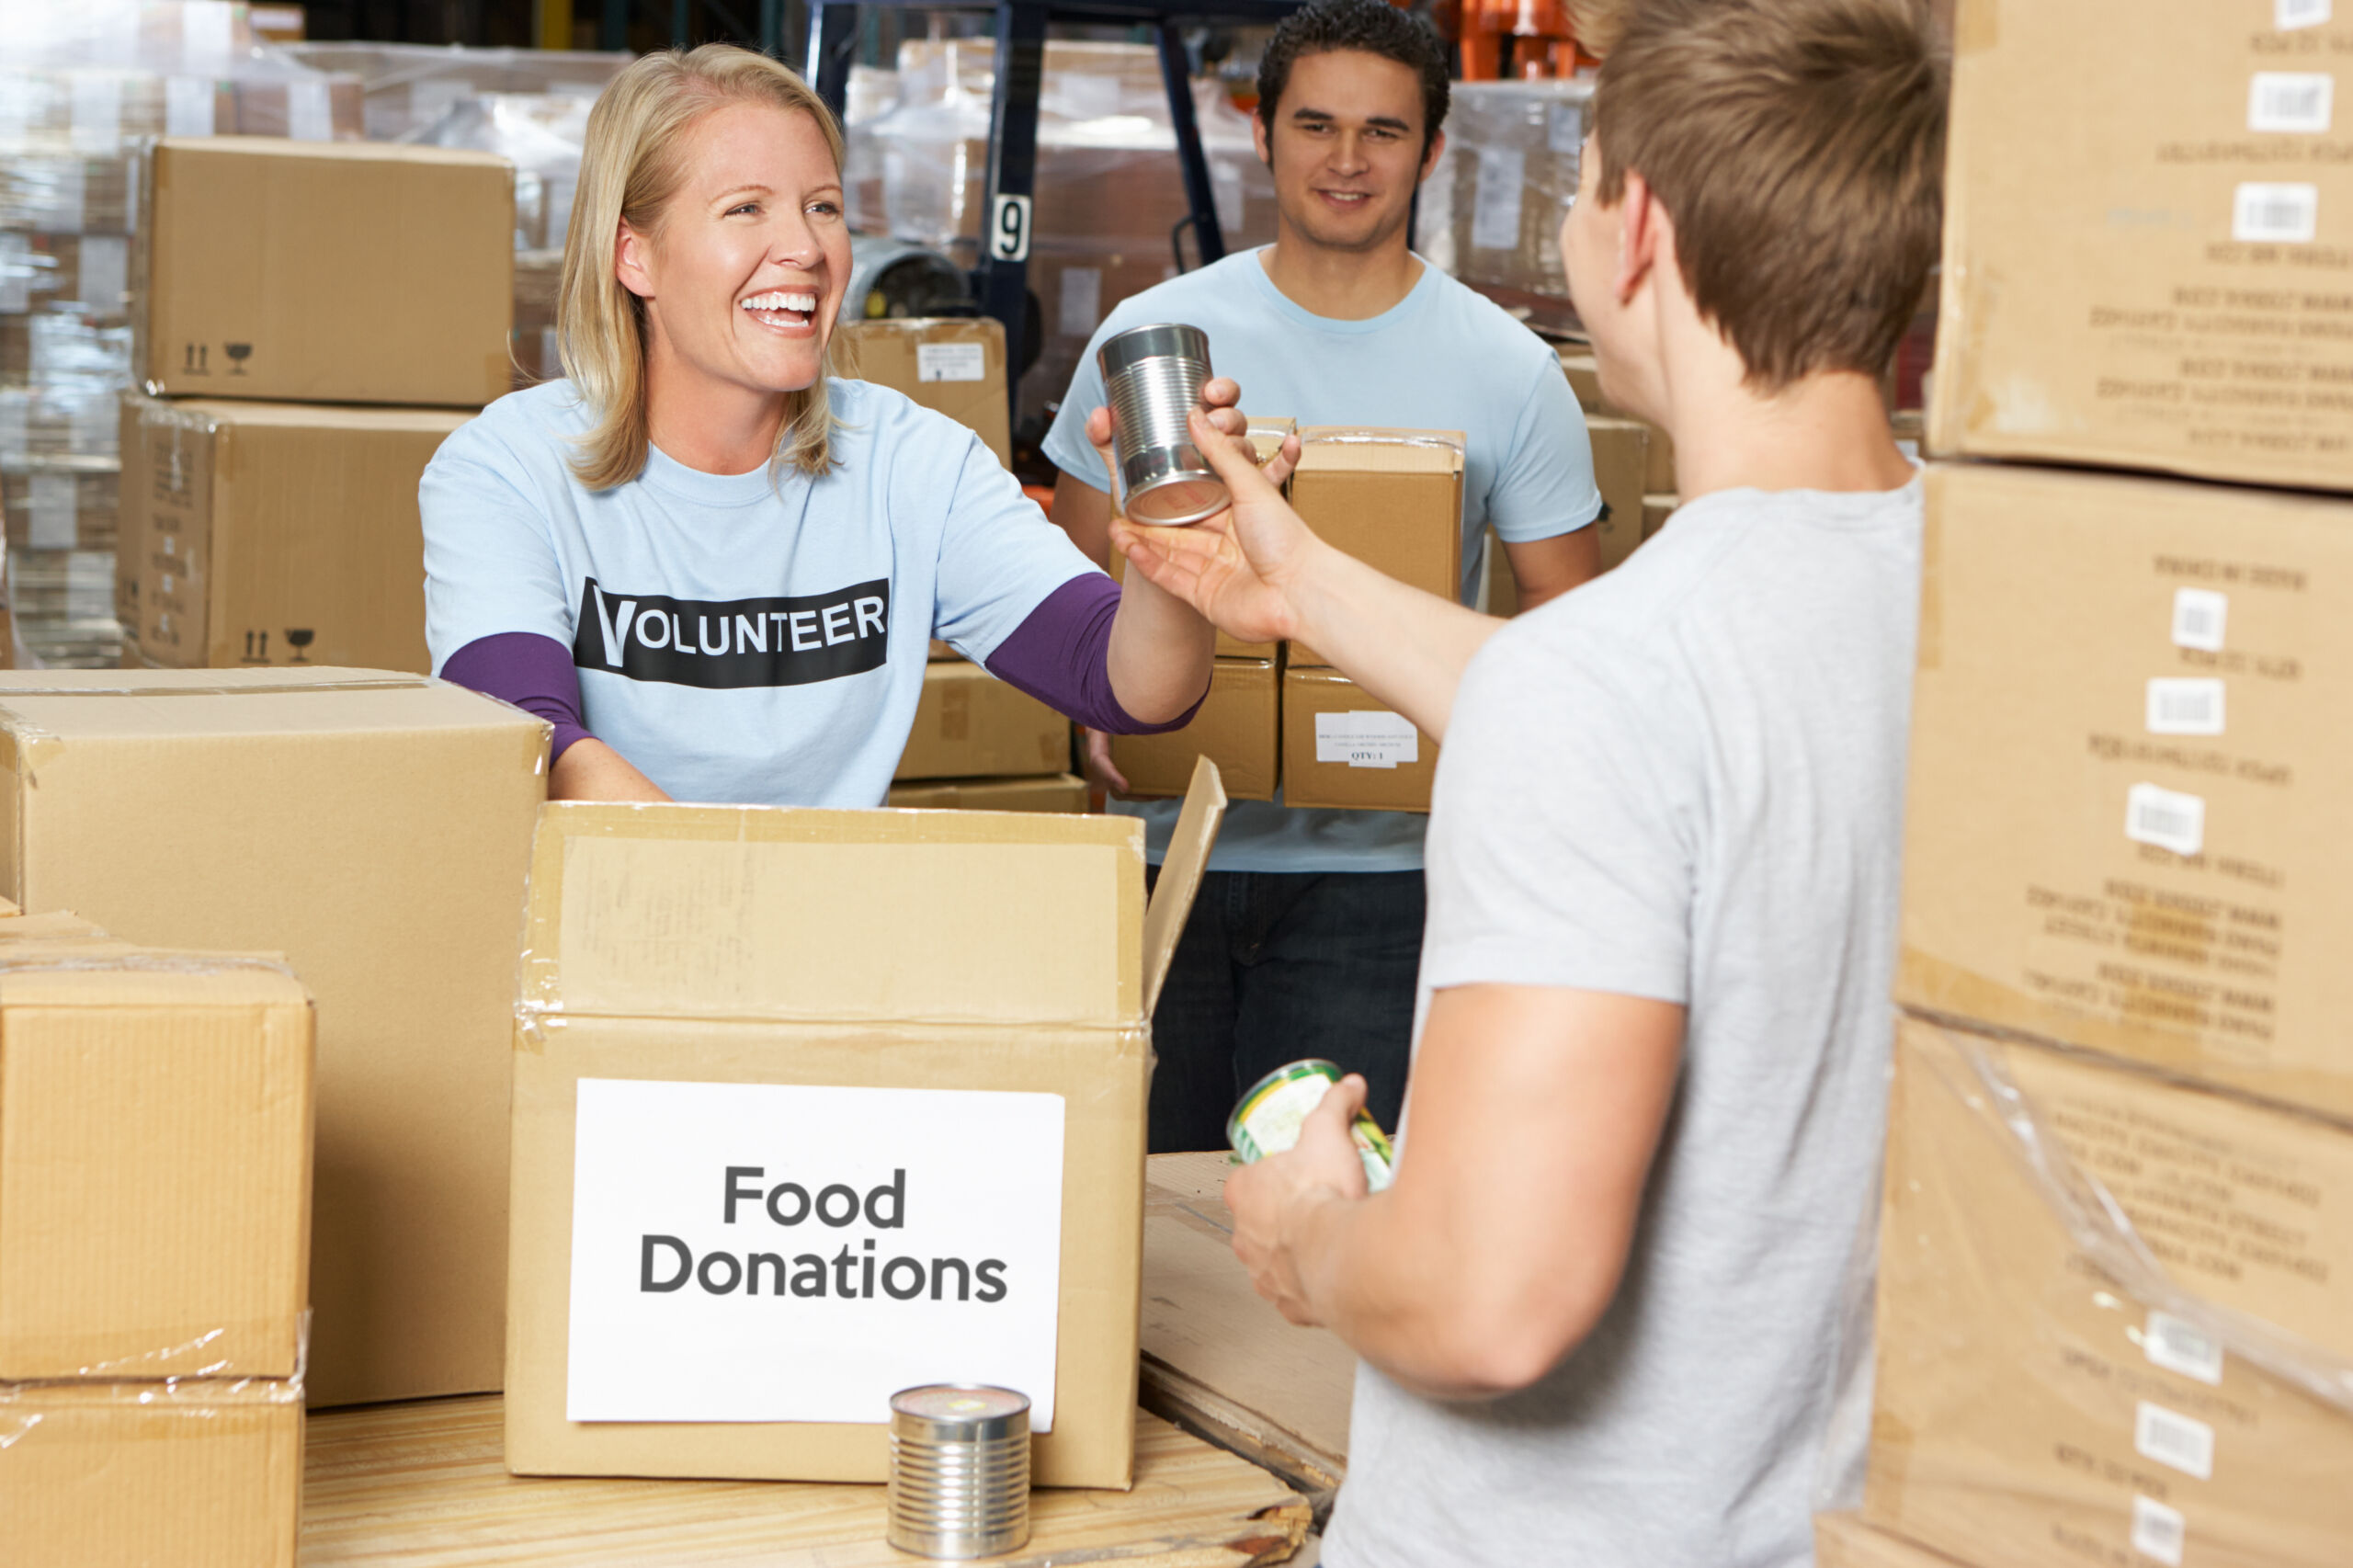 A smiling volunteer standing near piles of boxes receives a can of food to put into a box labeled 'food donations.'